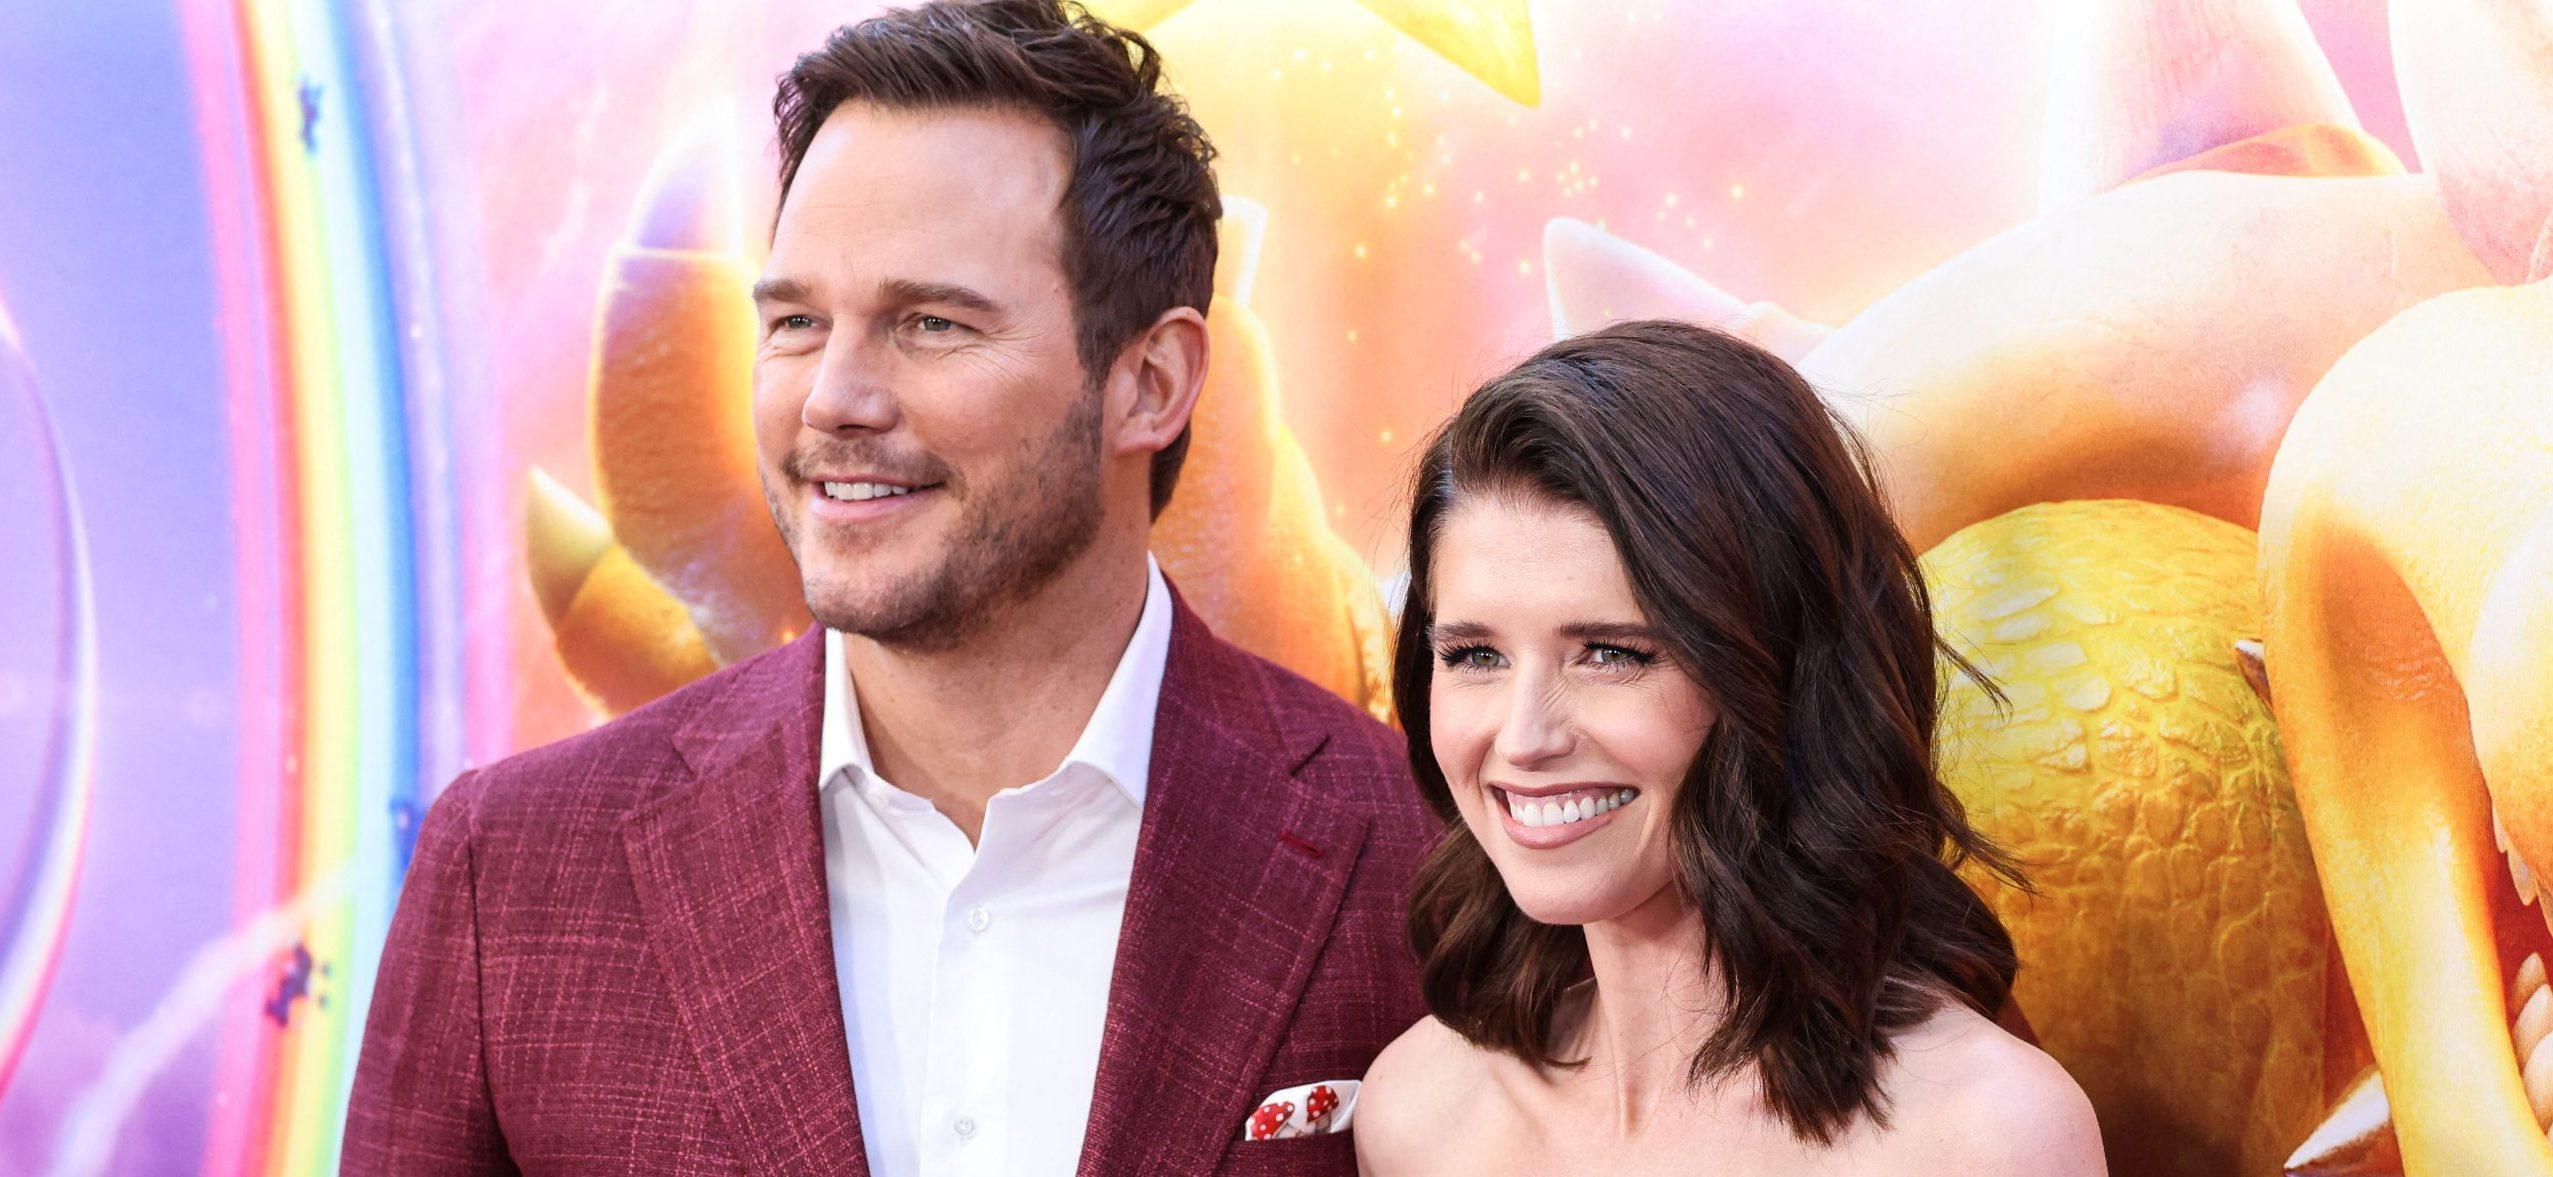 Chris Pratt and Katherine Schwarzenegger at the Los Angeles Special Screening Of Universal Pictures, Nintendo And Illumination Entertainment's 'The Super Mario Bros. Movie'